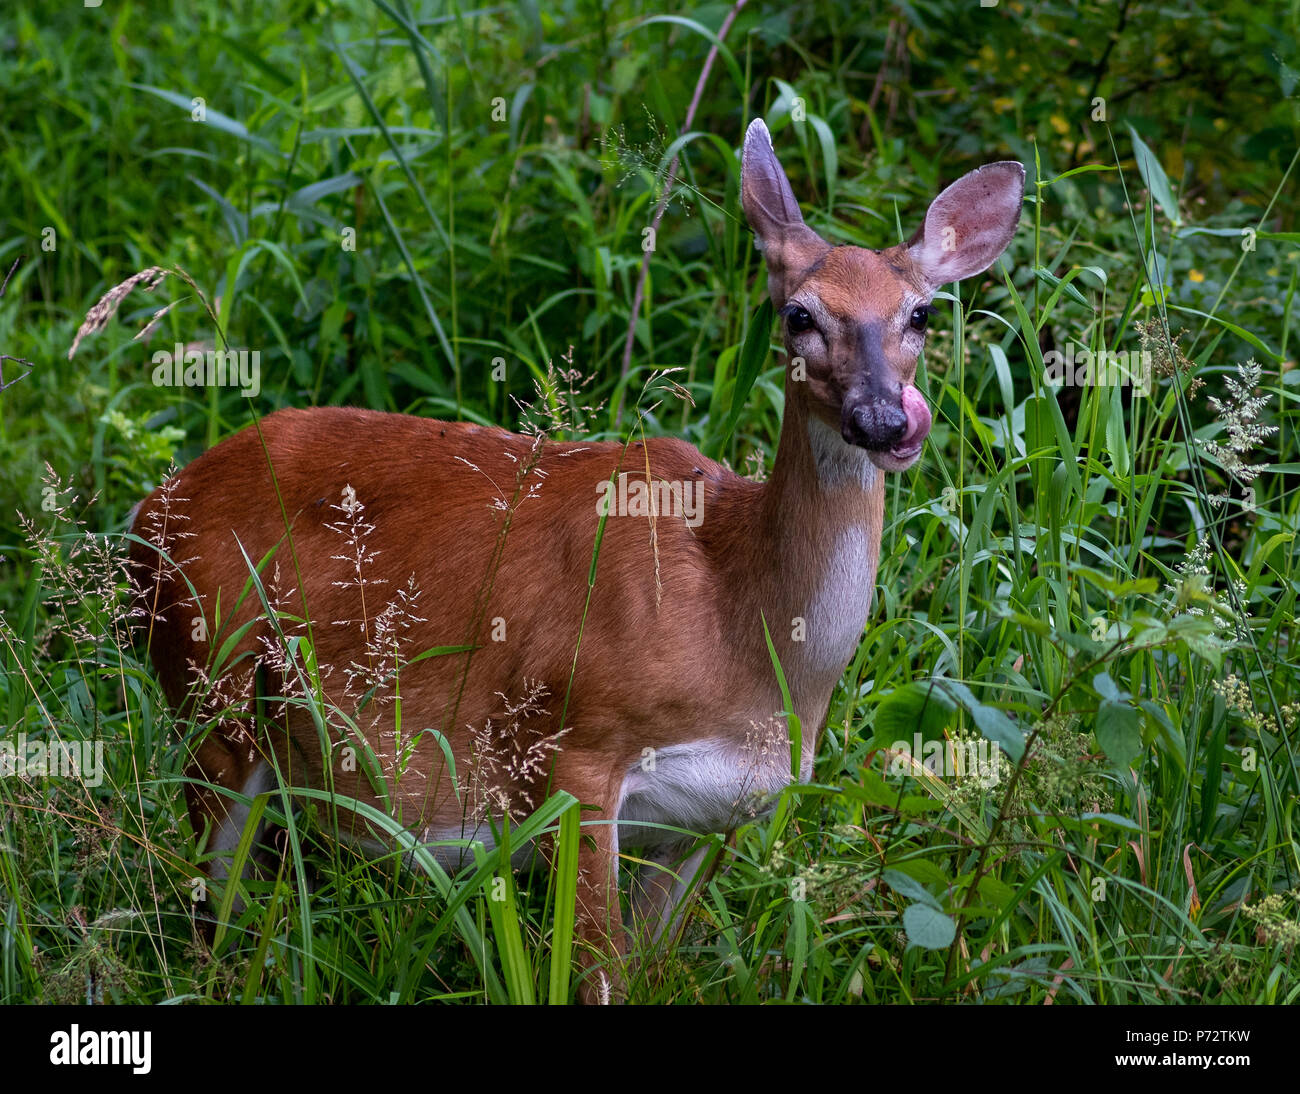 Pregnant Doe Summer Field - A pregnant white tail deer eating foliage and greens. Doe will likely give birth soon to 2 fawns. Photo taken June. Stock Photo